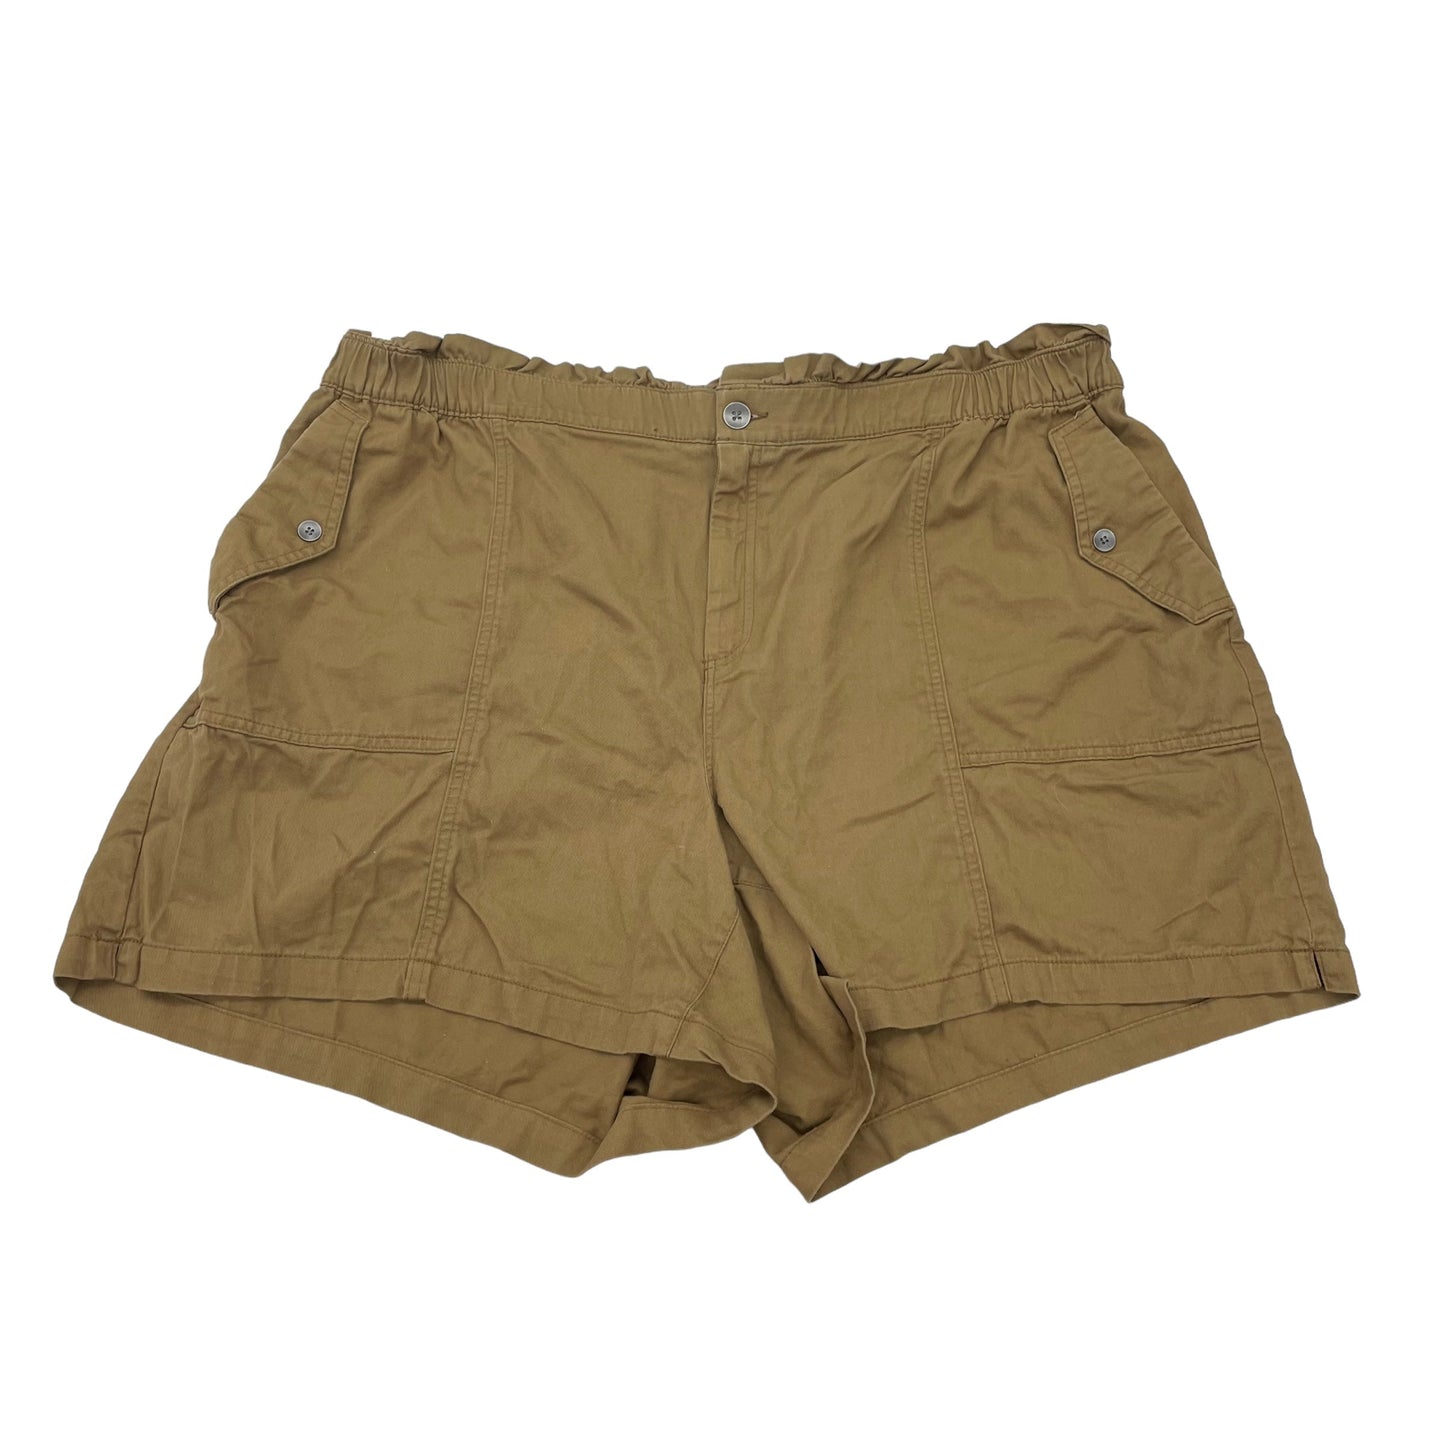 BROWN OLD NAVY SHORTS, Size 3X